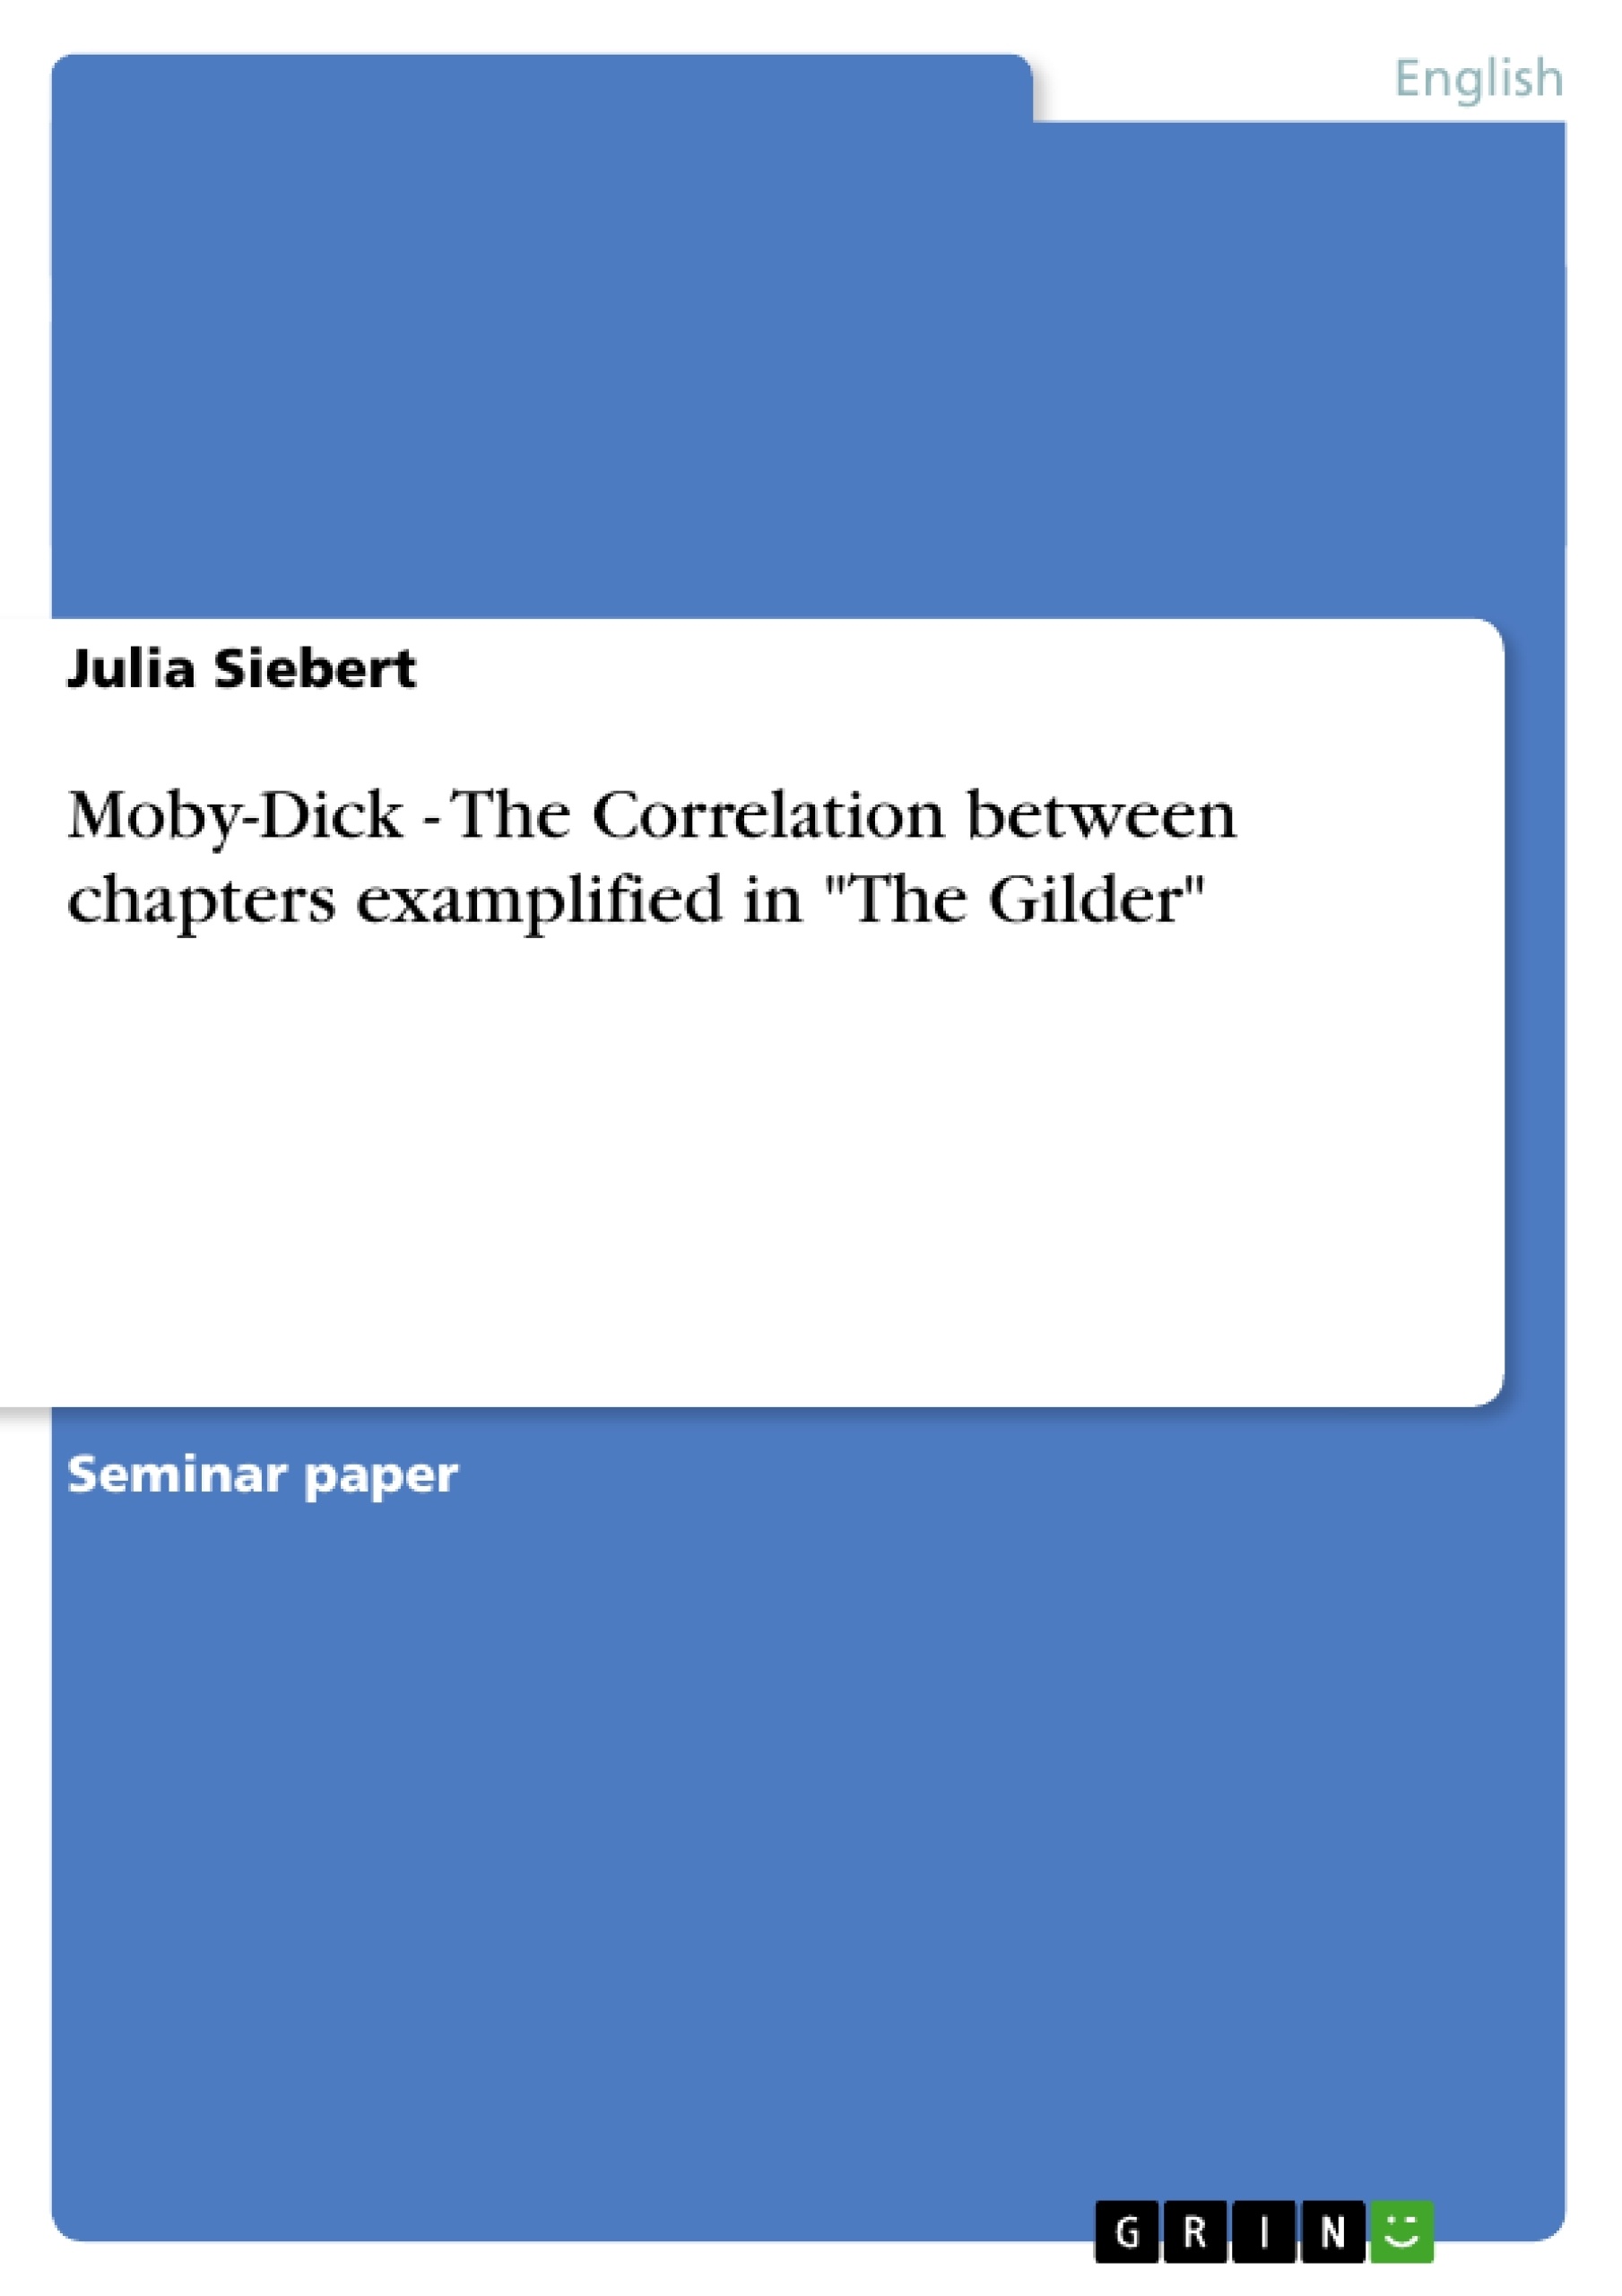 Titel: Moby-Dick - The Correlation between chapters examplified in "The Gilder"